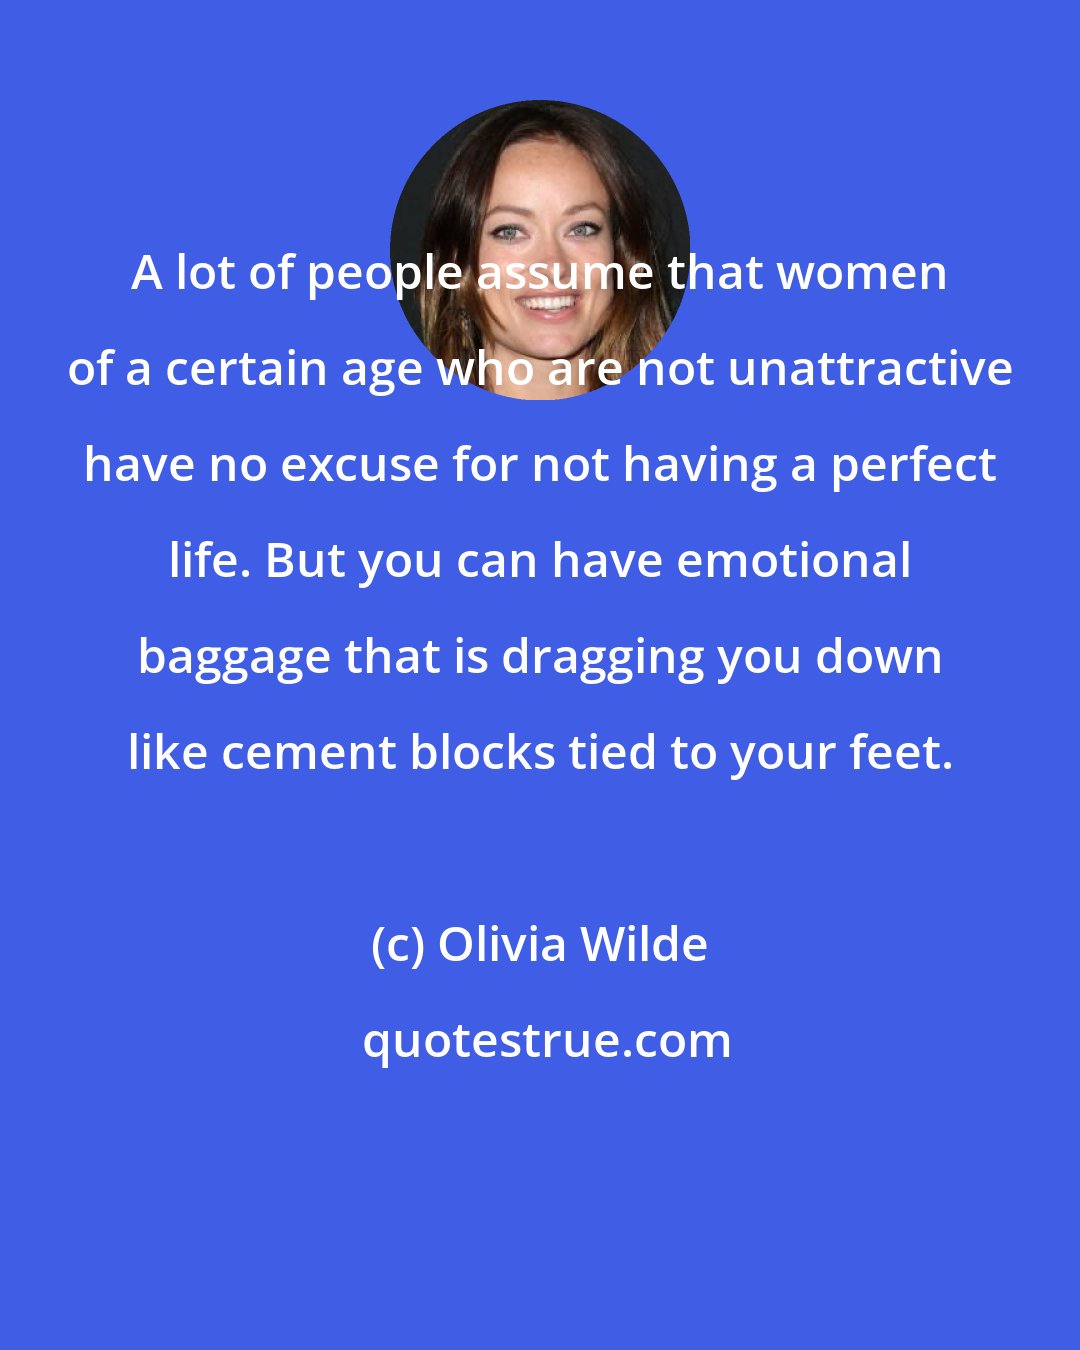 Olivia Wilde: A lot of people assume that women of a certain age who are not unattractive have no excuse for not having a perfect life. But you can have emotional baggage that is dragging you down like cement blocks tied to your feet.